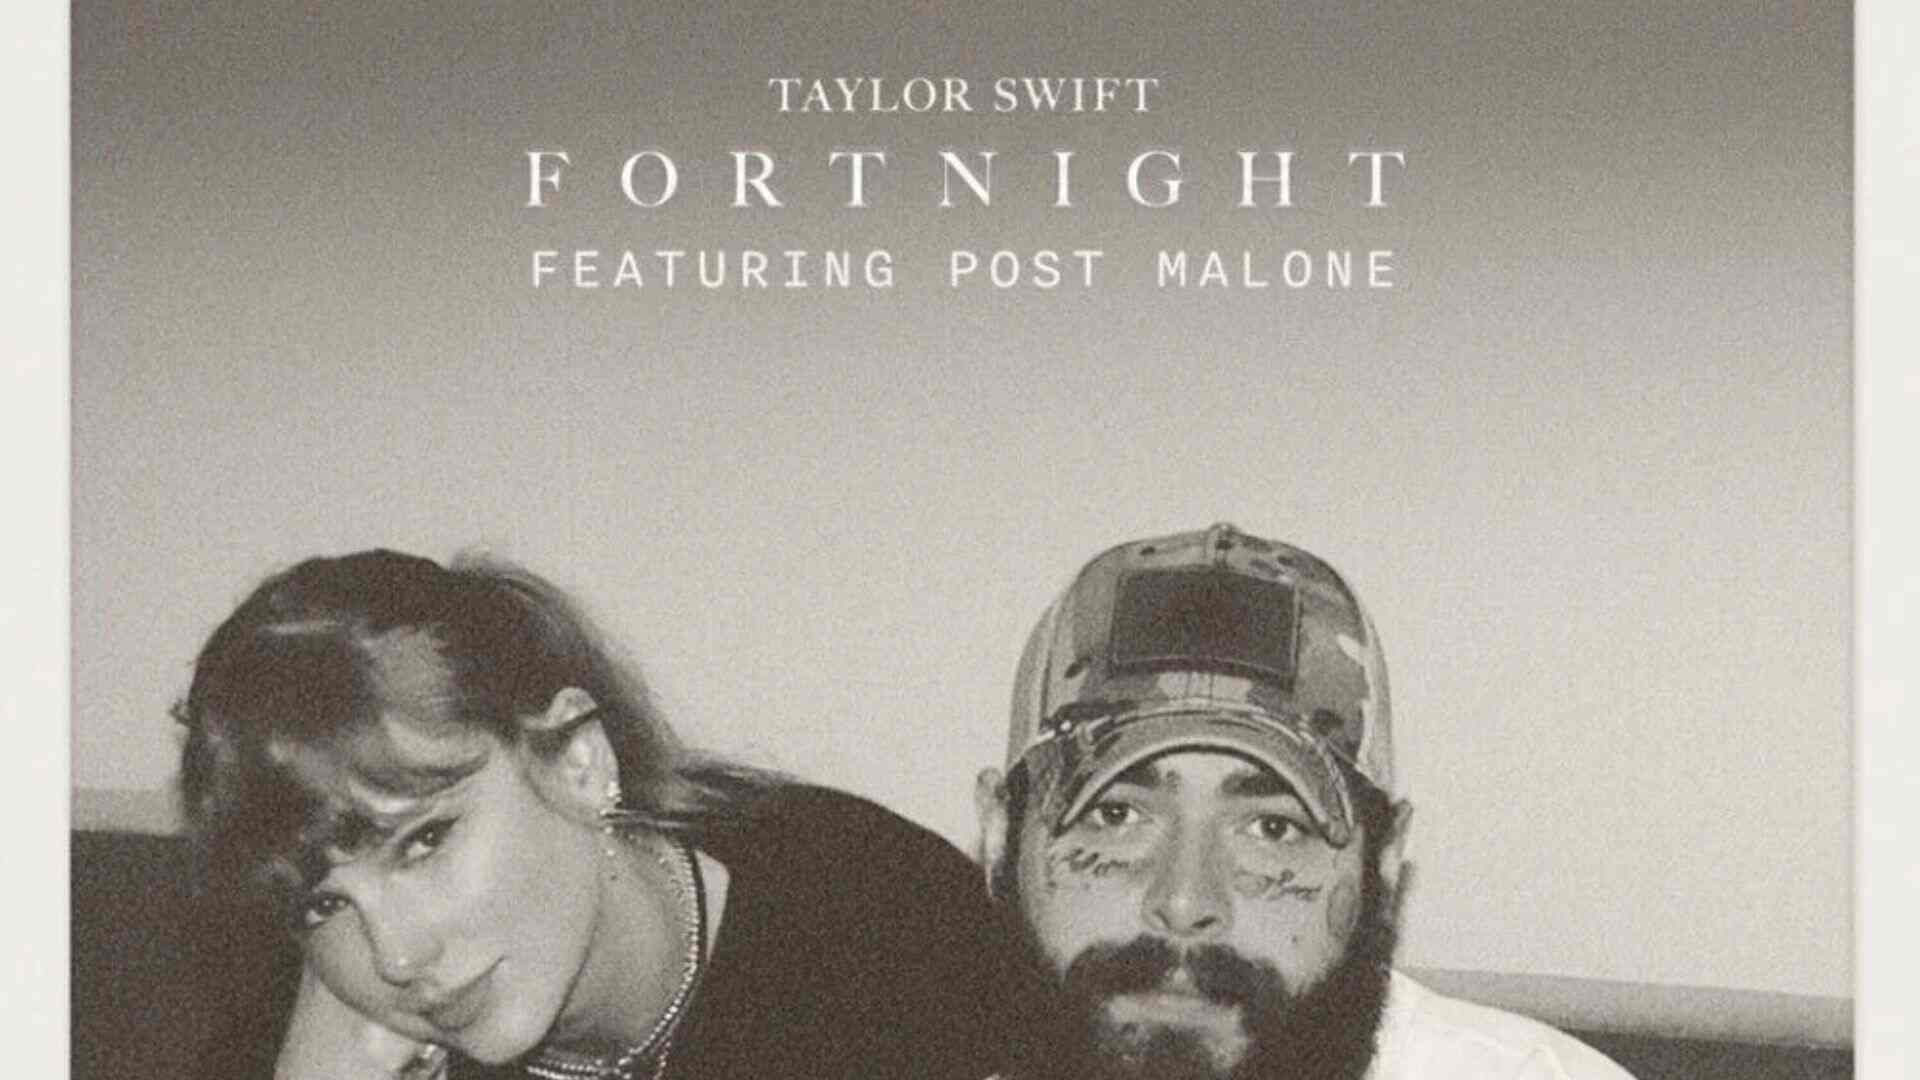 Taylor Swift unveils music video for ‘Fortnight’ featuring Post Malone